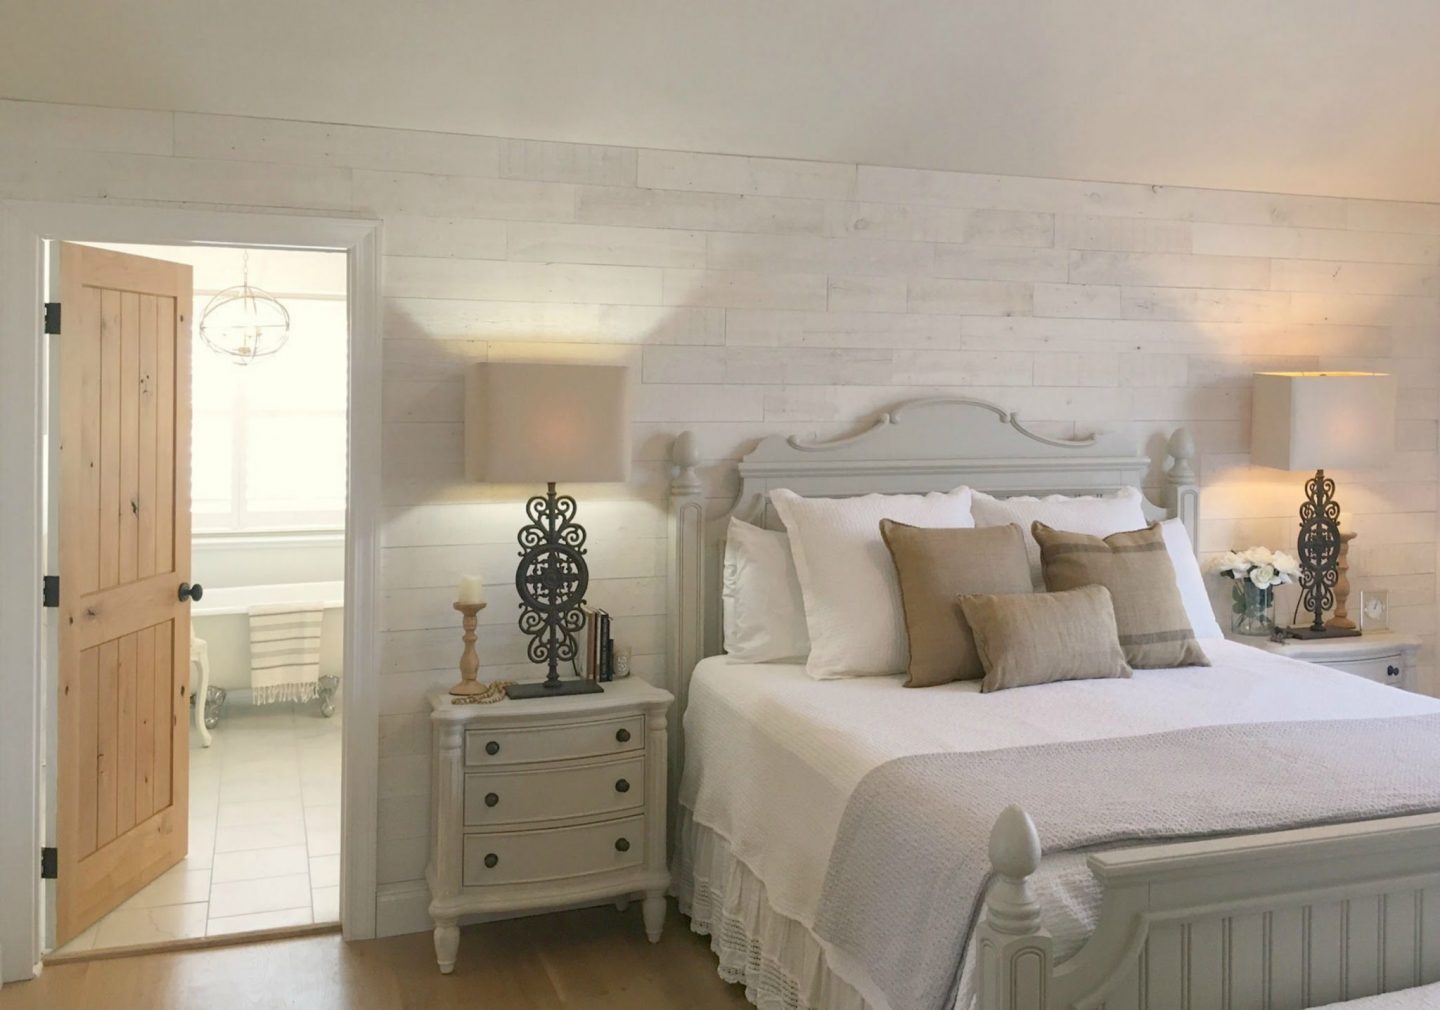 Hello Lovely Studio's serene white bedroom with Stikwood (Hamptons) statement wall, cottage style furniture, knotty alder door with oiled bronze hardware, and white oak wide plank hardwood flooring.  Let's chat about how to decorate chic yet cheap!